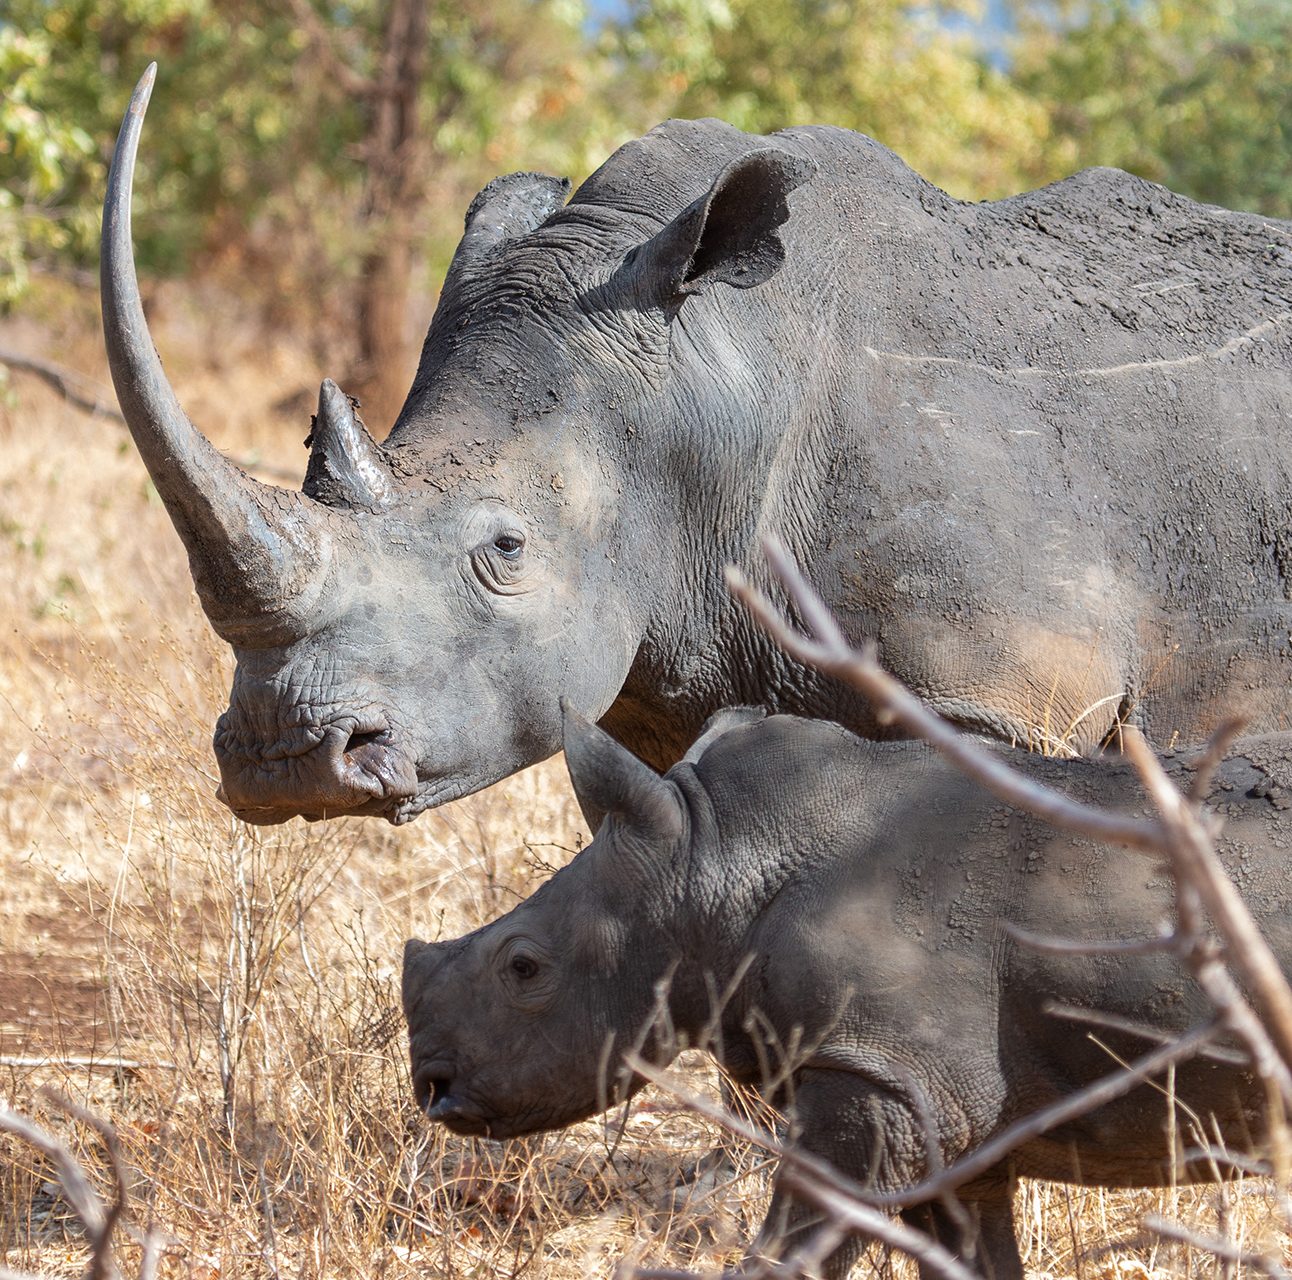 An adult and baby rhino walking together in Meru National Park